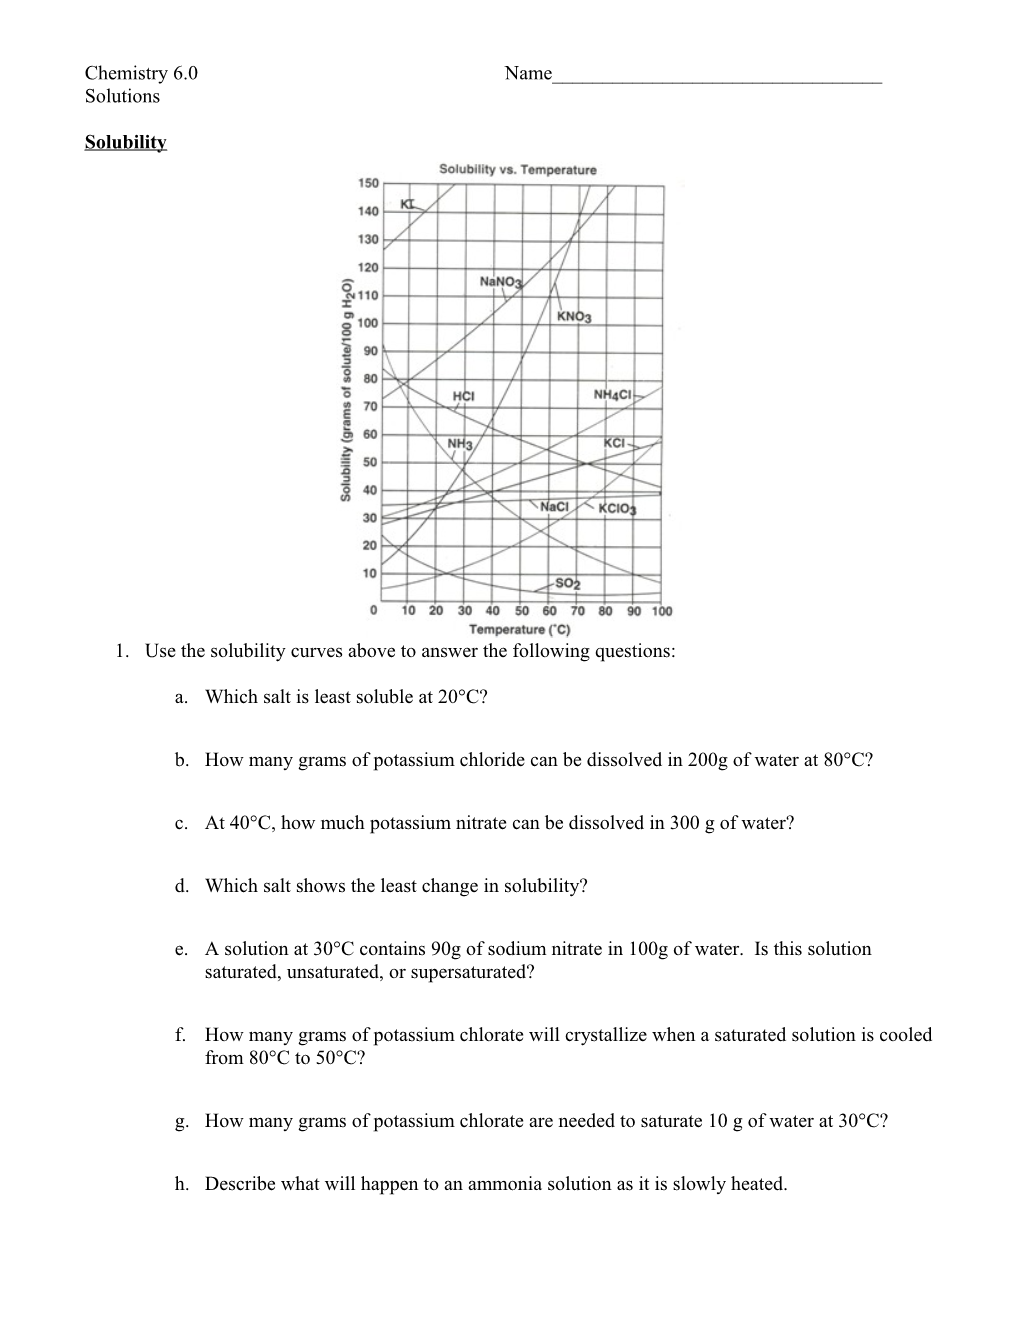 1. Use the Solubility Curves Above to Answer the Following Questions